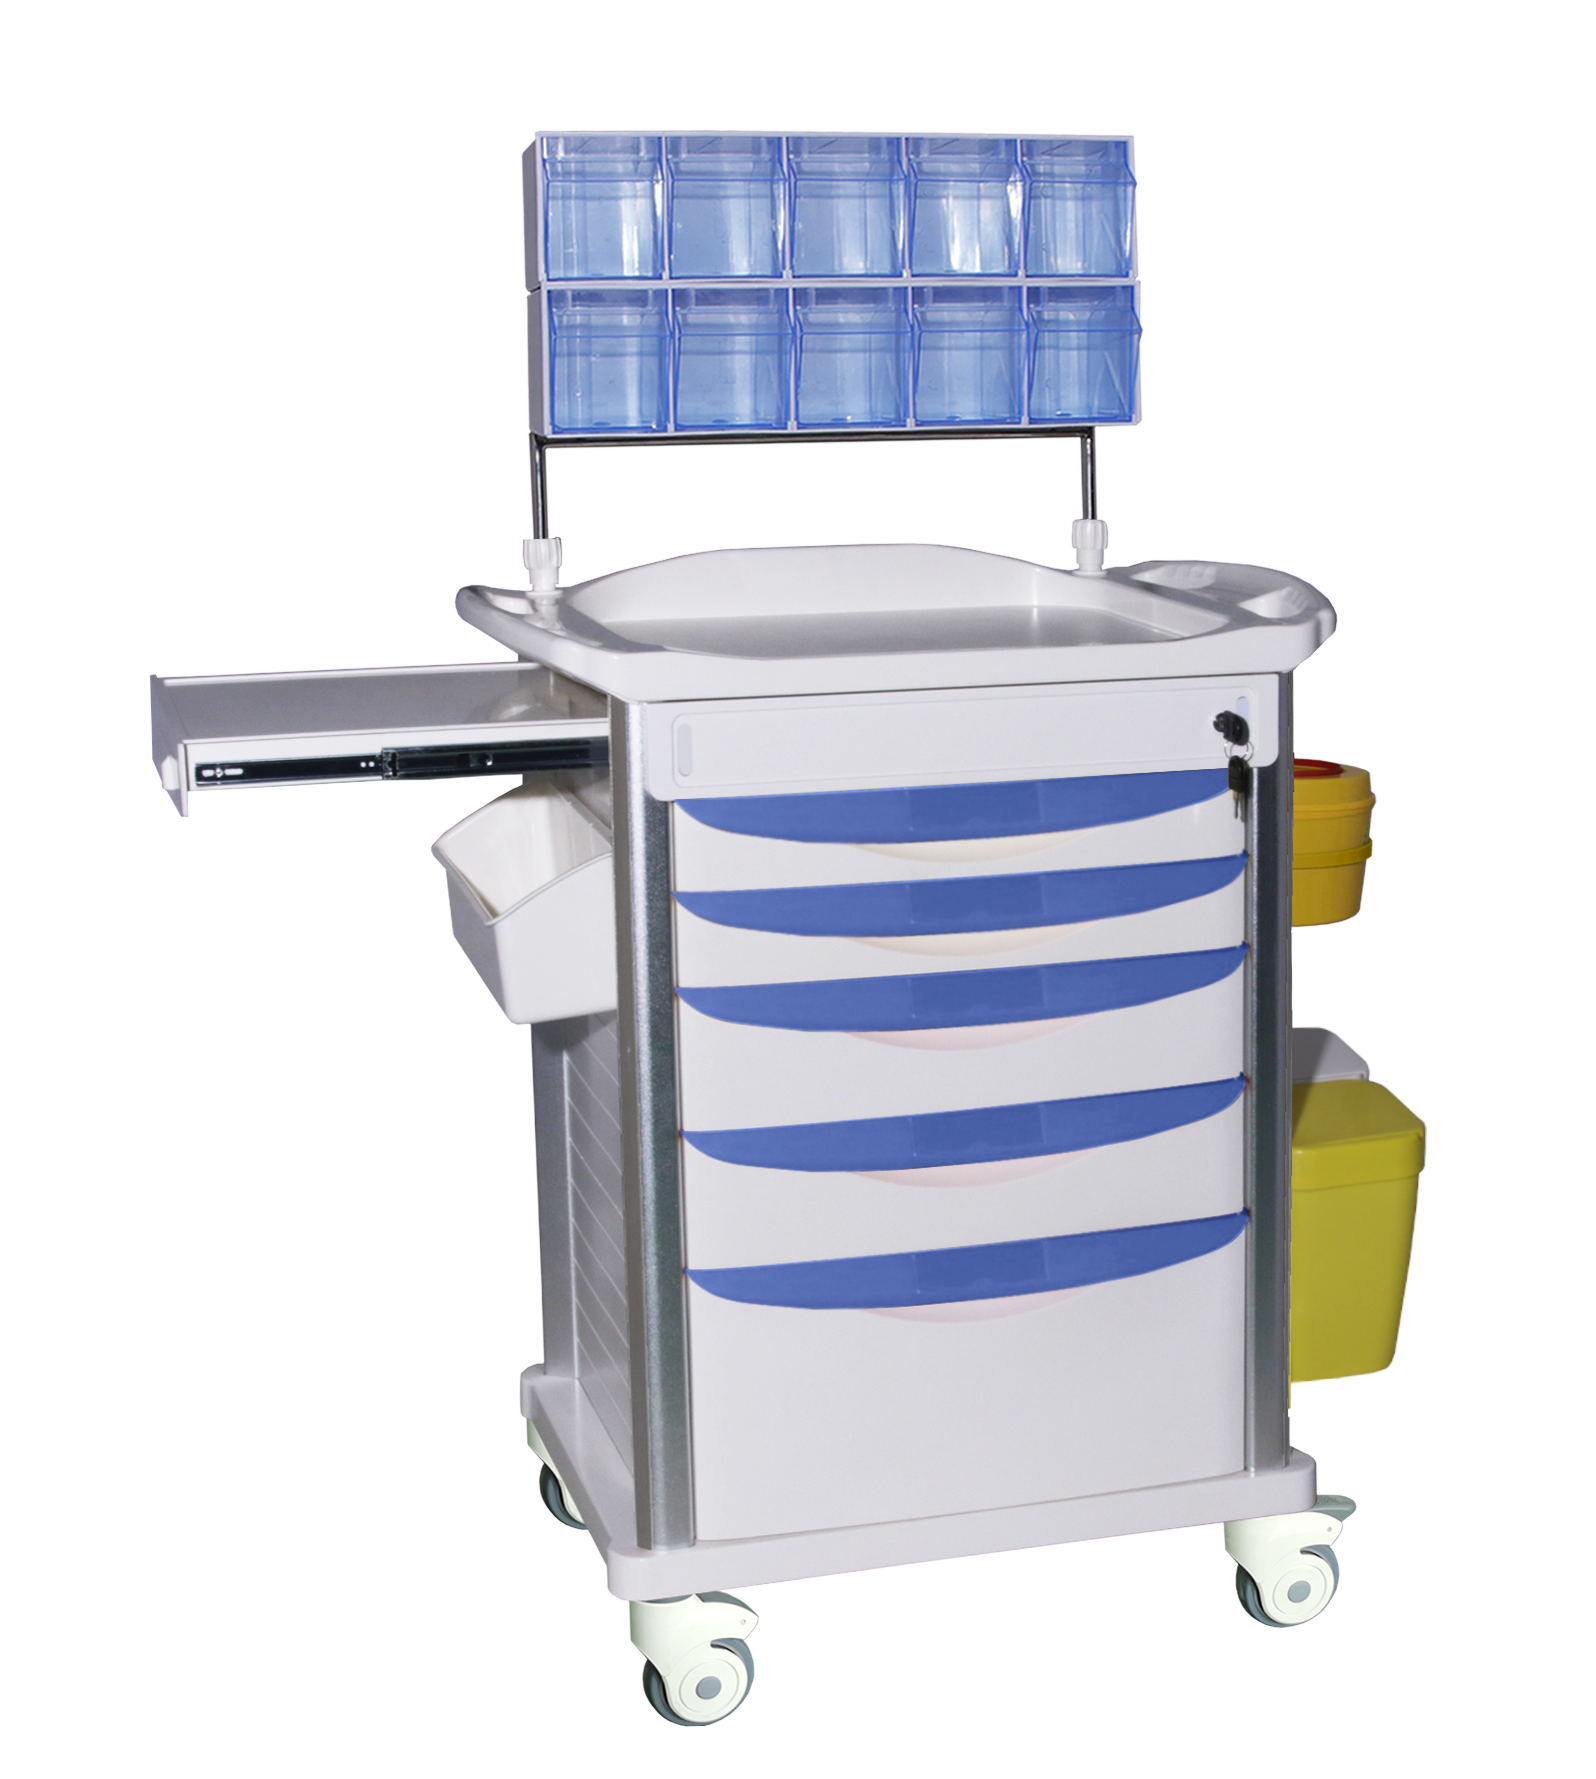 Hospital Emergency Trolley Multi-function Cart ABS Medication Anesthesia Cart Trolley with Wheel